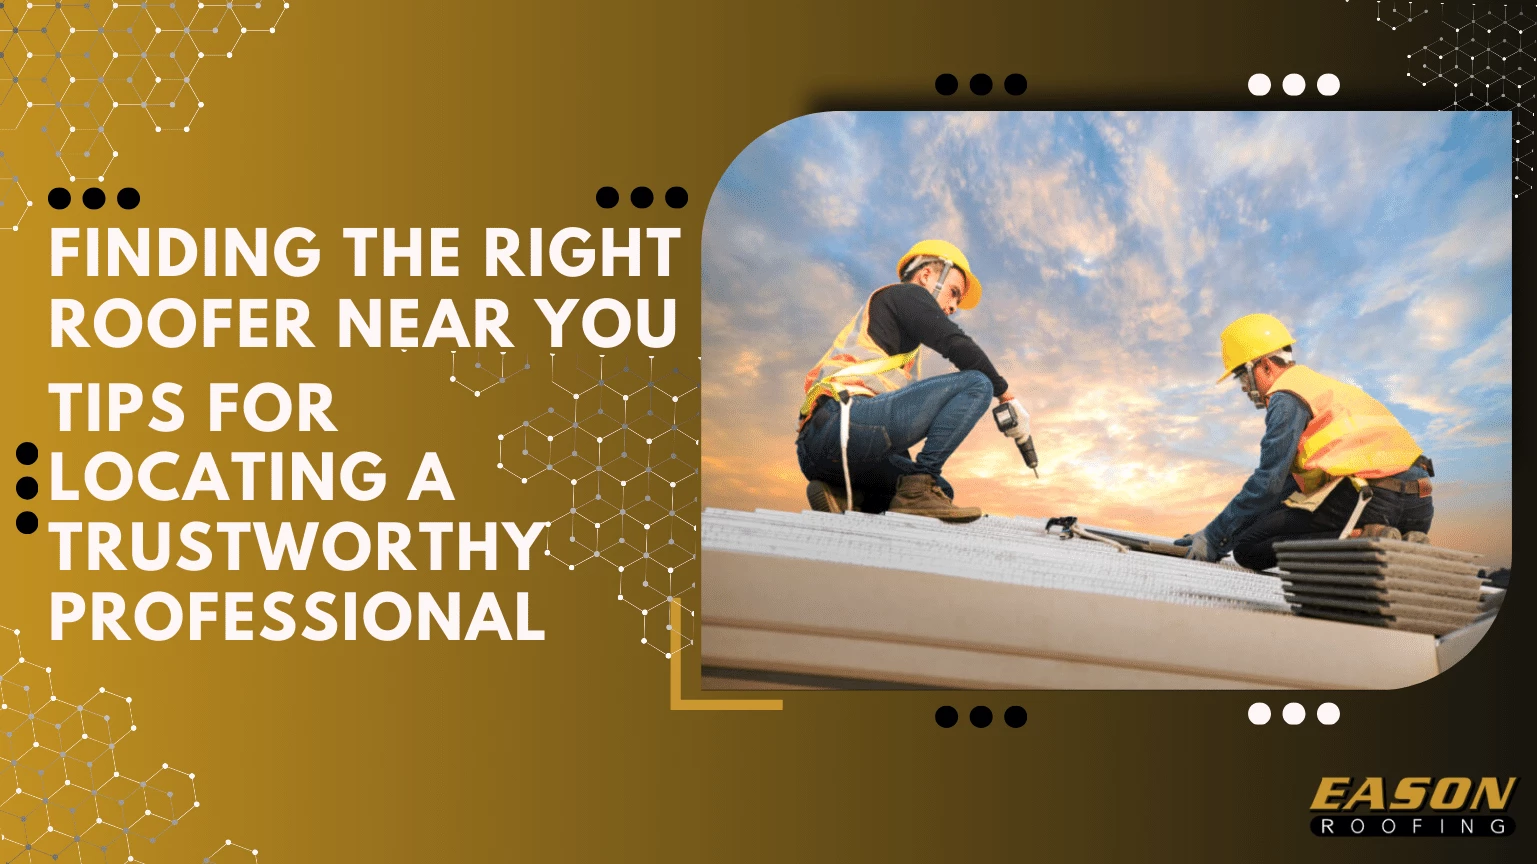 Finding the Right Roofer Near You Tips for Locating a Trustworthy Professional